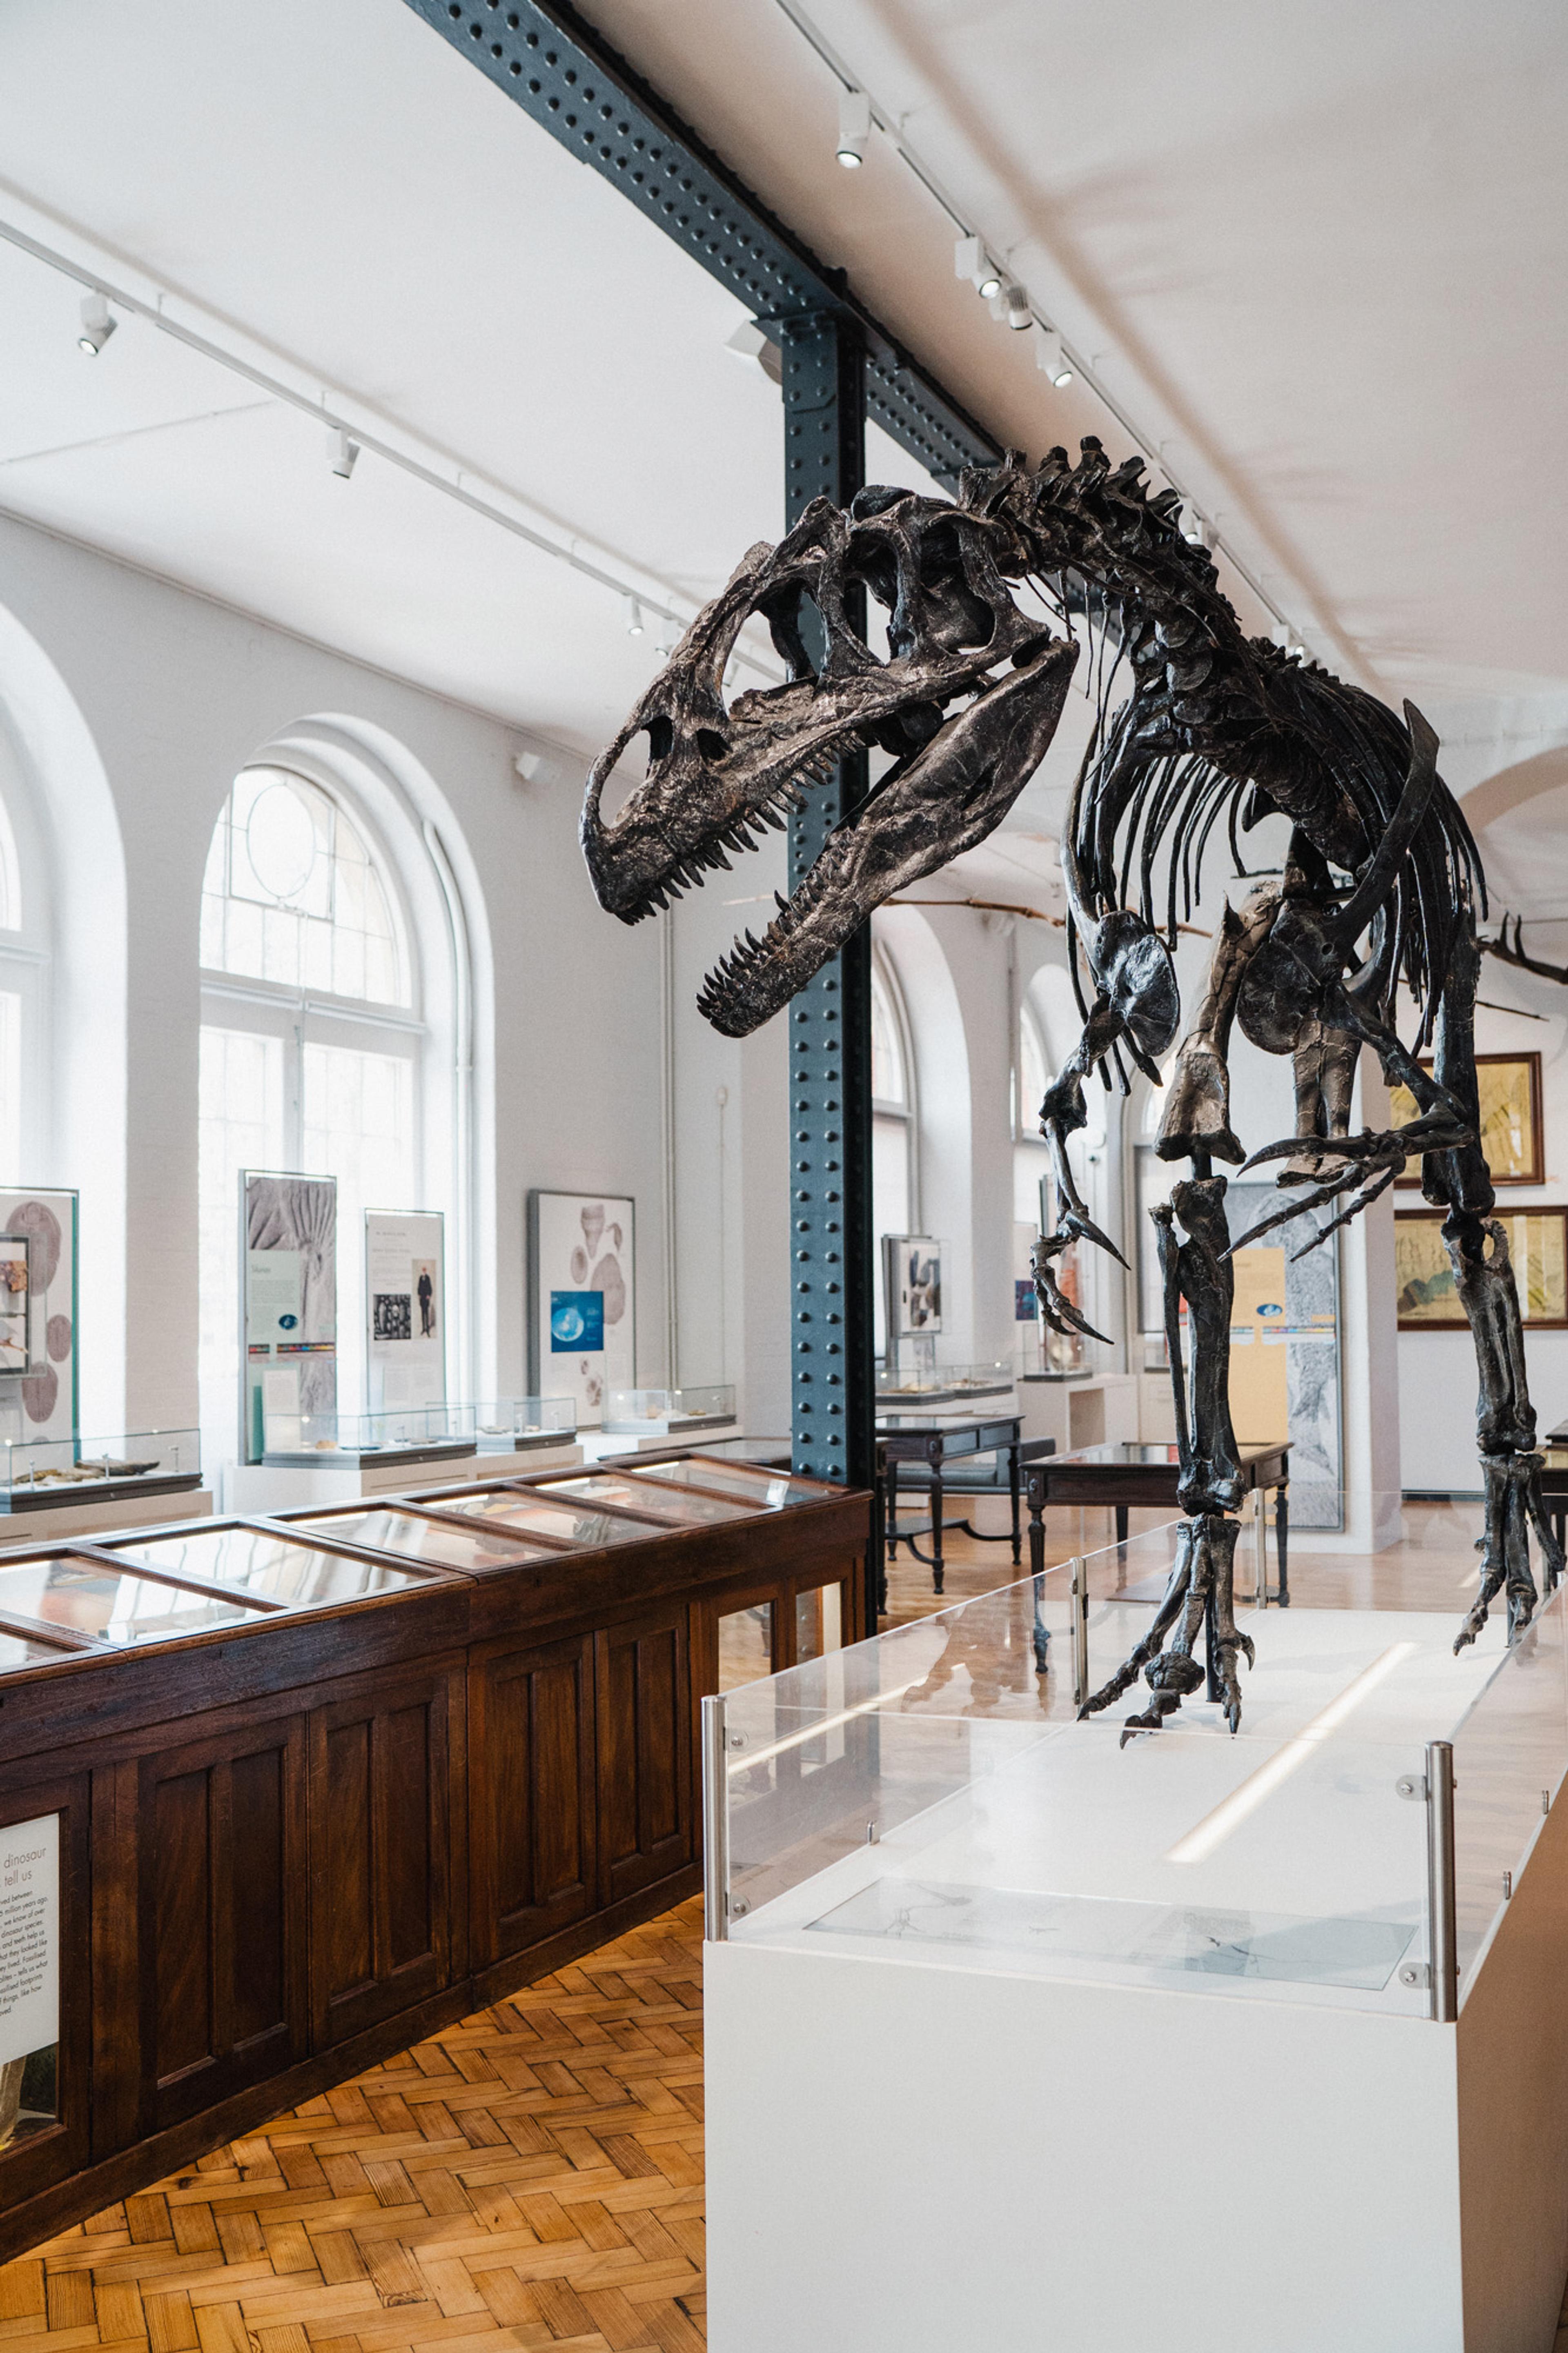 A dinosaur skeleton displayed in a gallery with wooden parquet floor